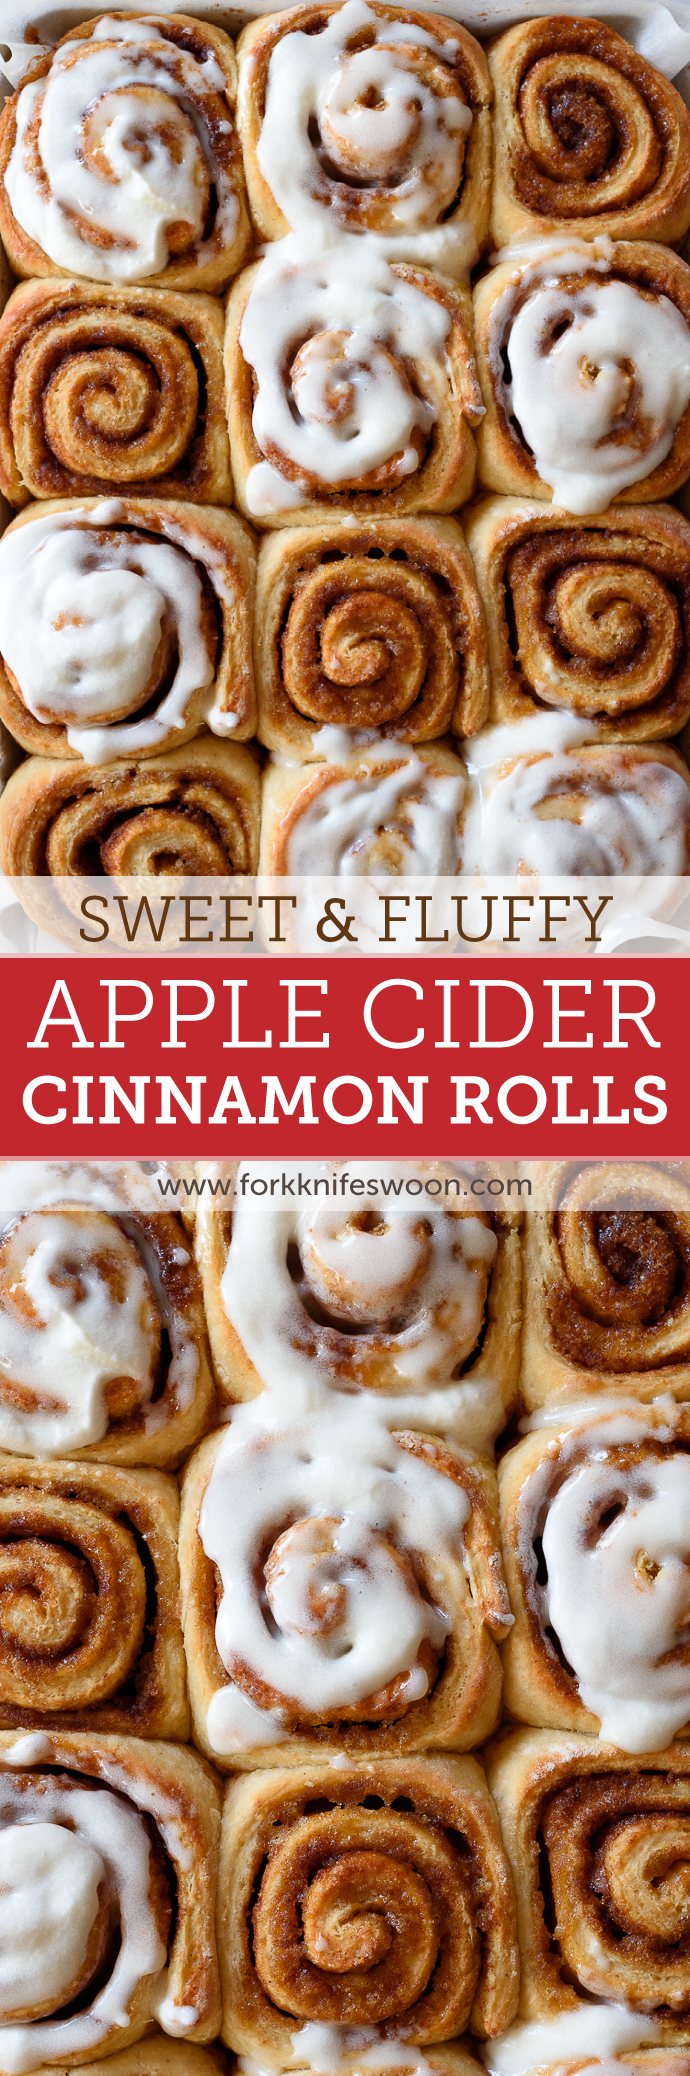 Homemade Apple Cider Cinnamon Rolls with Brown Sugar Apple Butter Filling via forkknifeswoon.com | @forkknifeswoon